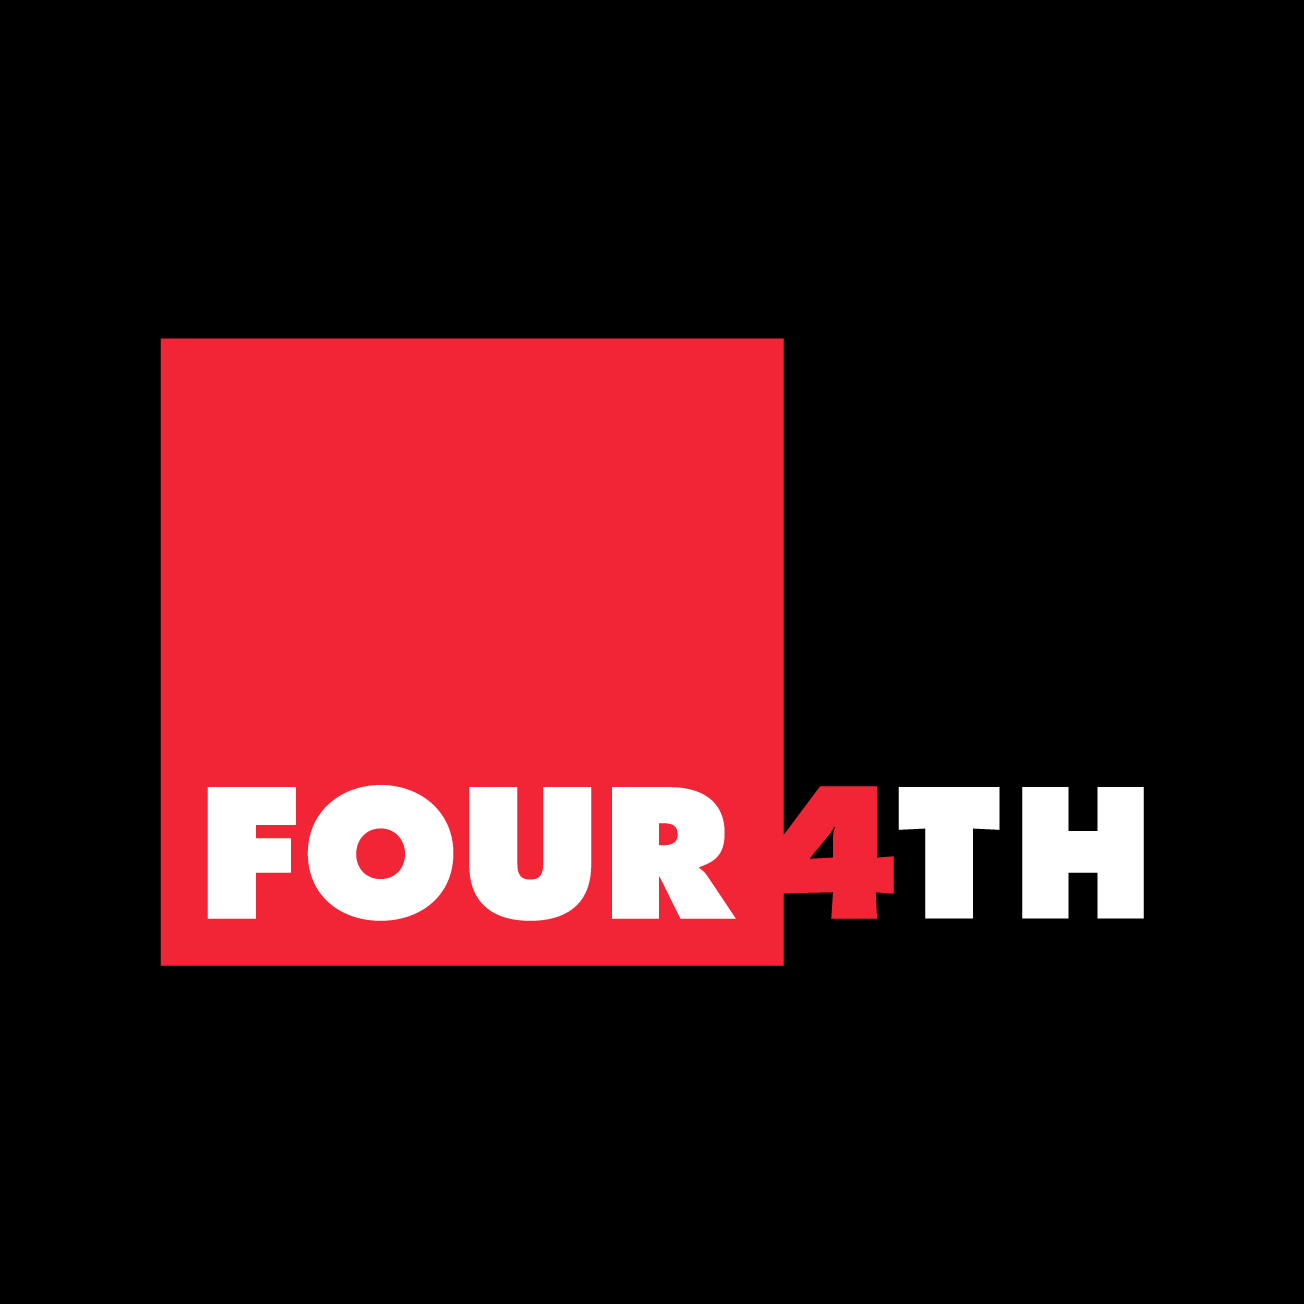 Club Image for FOUR4TH